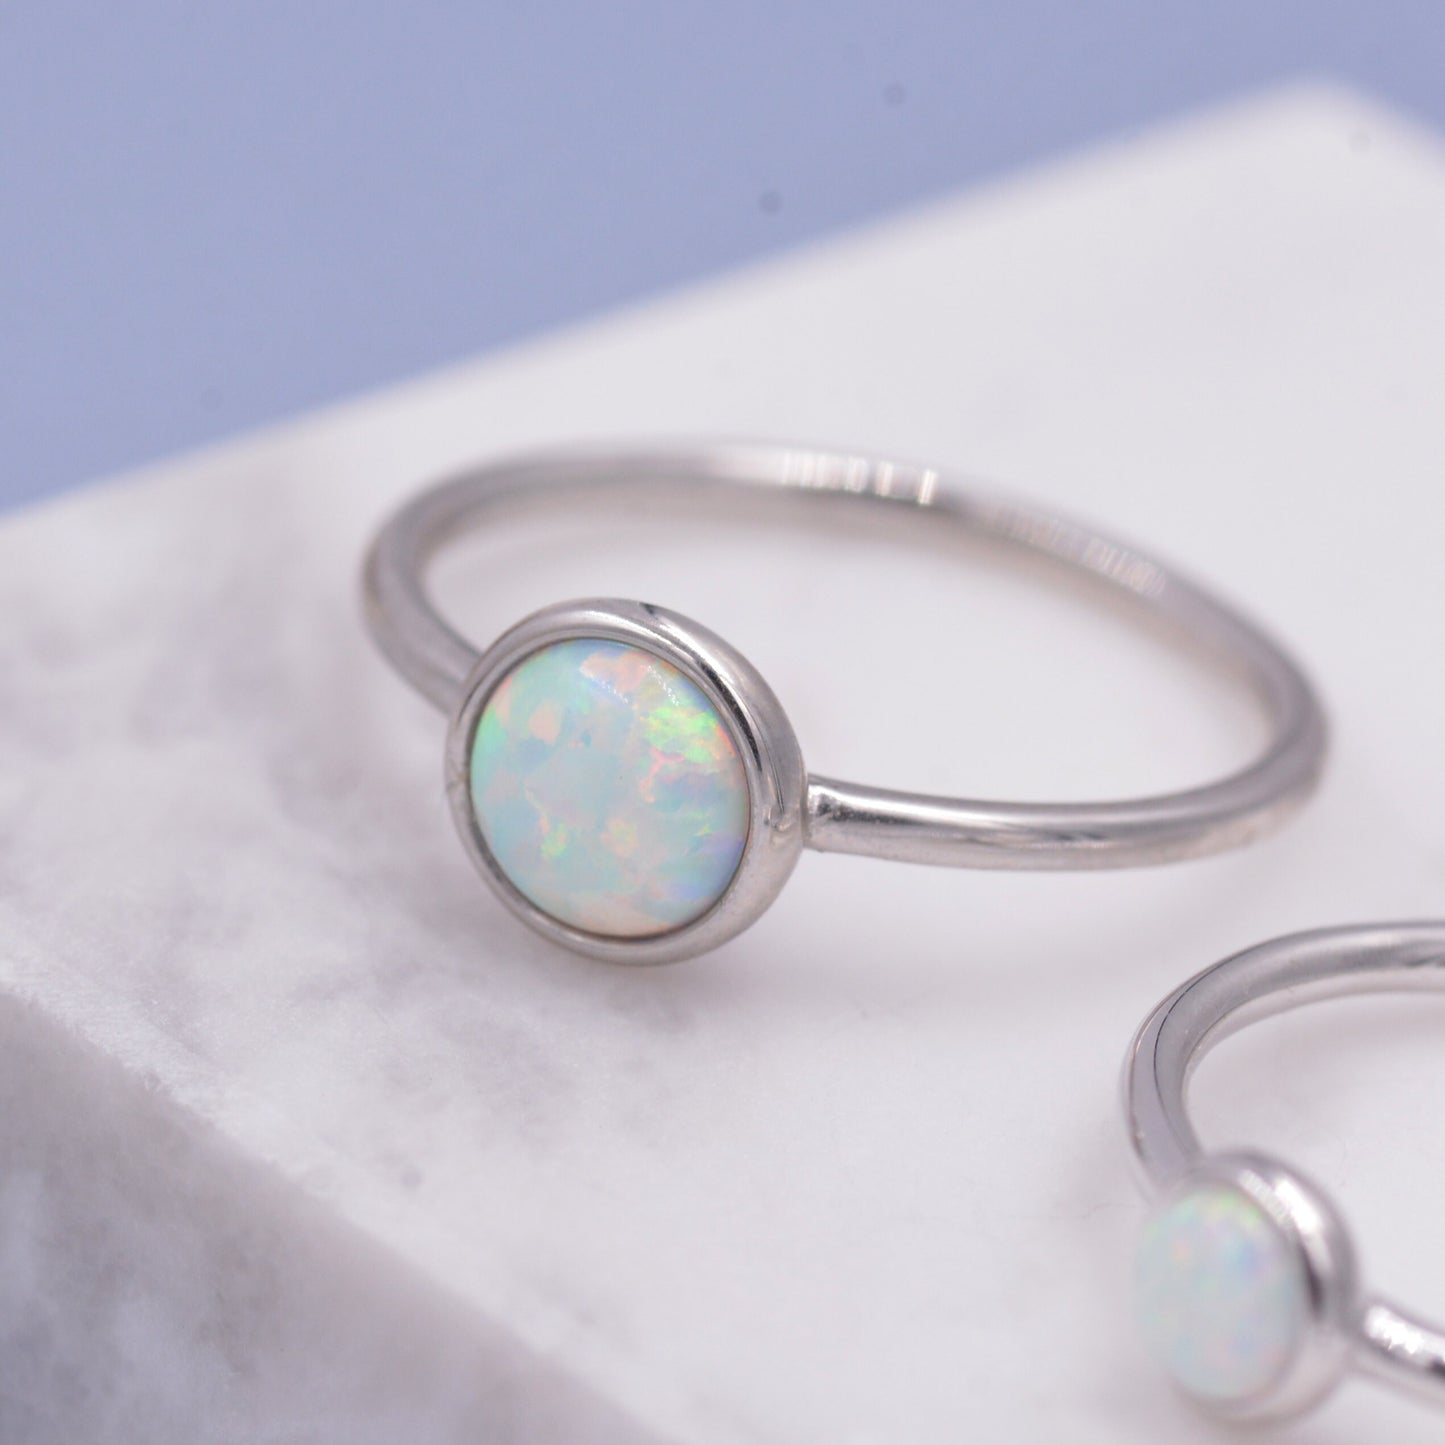 Sterling Silver Opal Ring,  US Size 5 6 7 8, Skinny Stacking Ring, White Opal, Midi Ring, Minimalist Geometric Ring